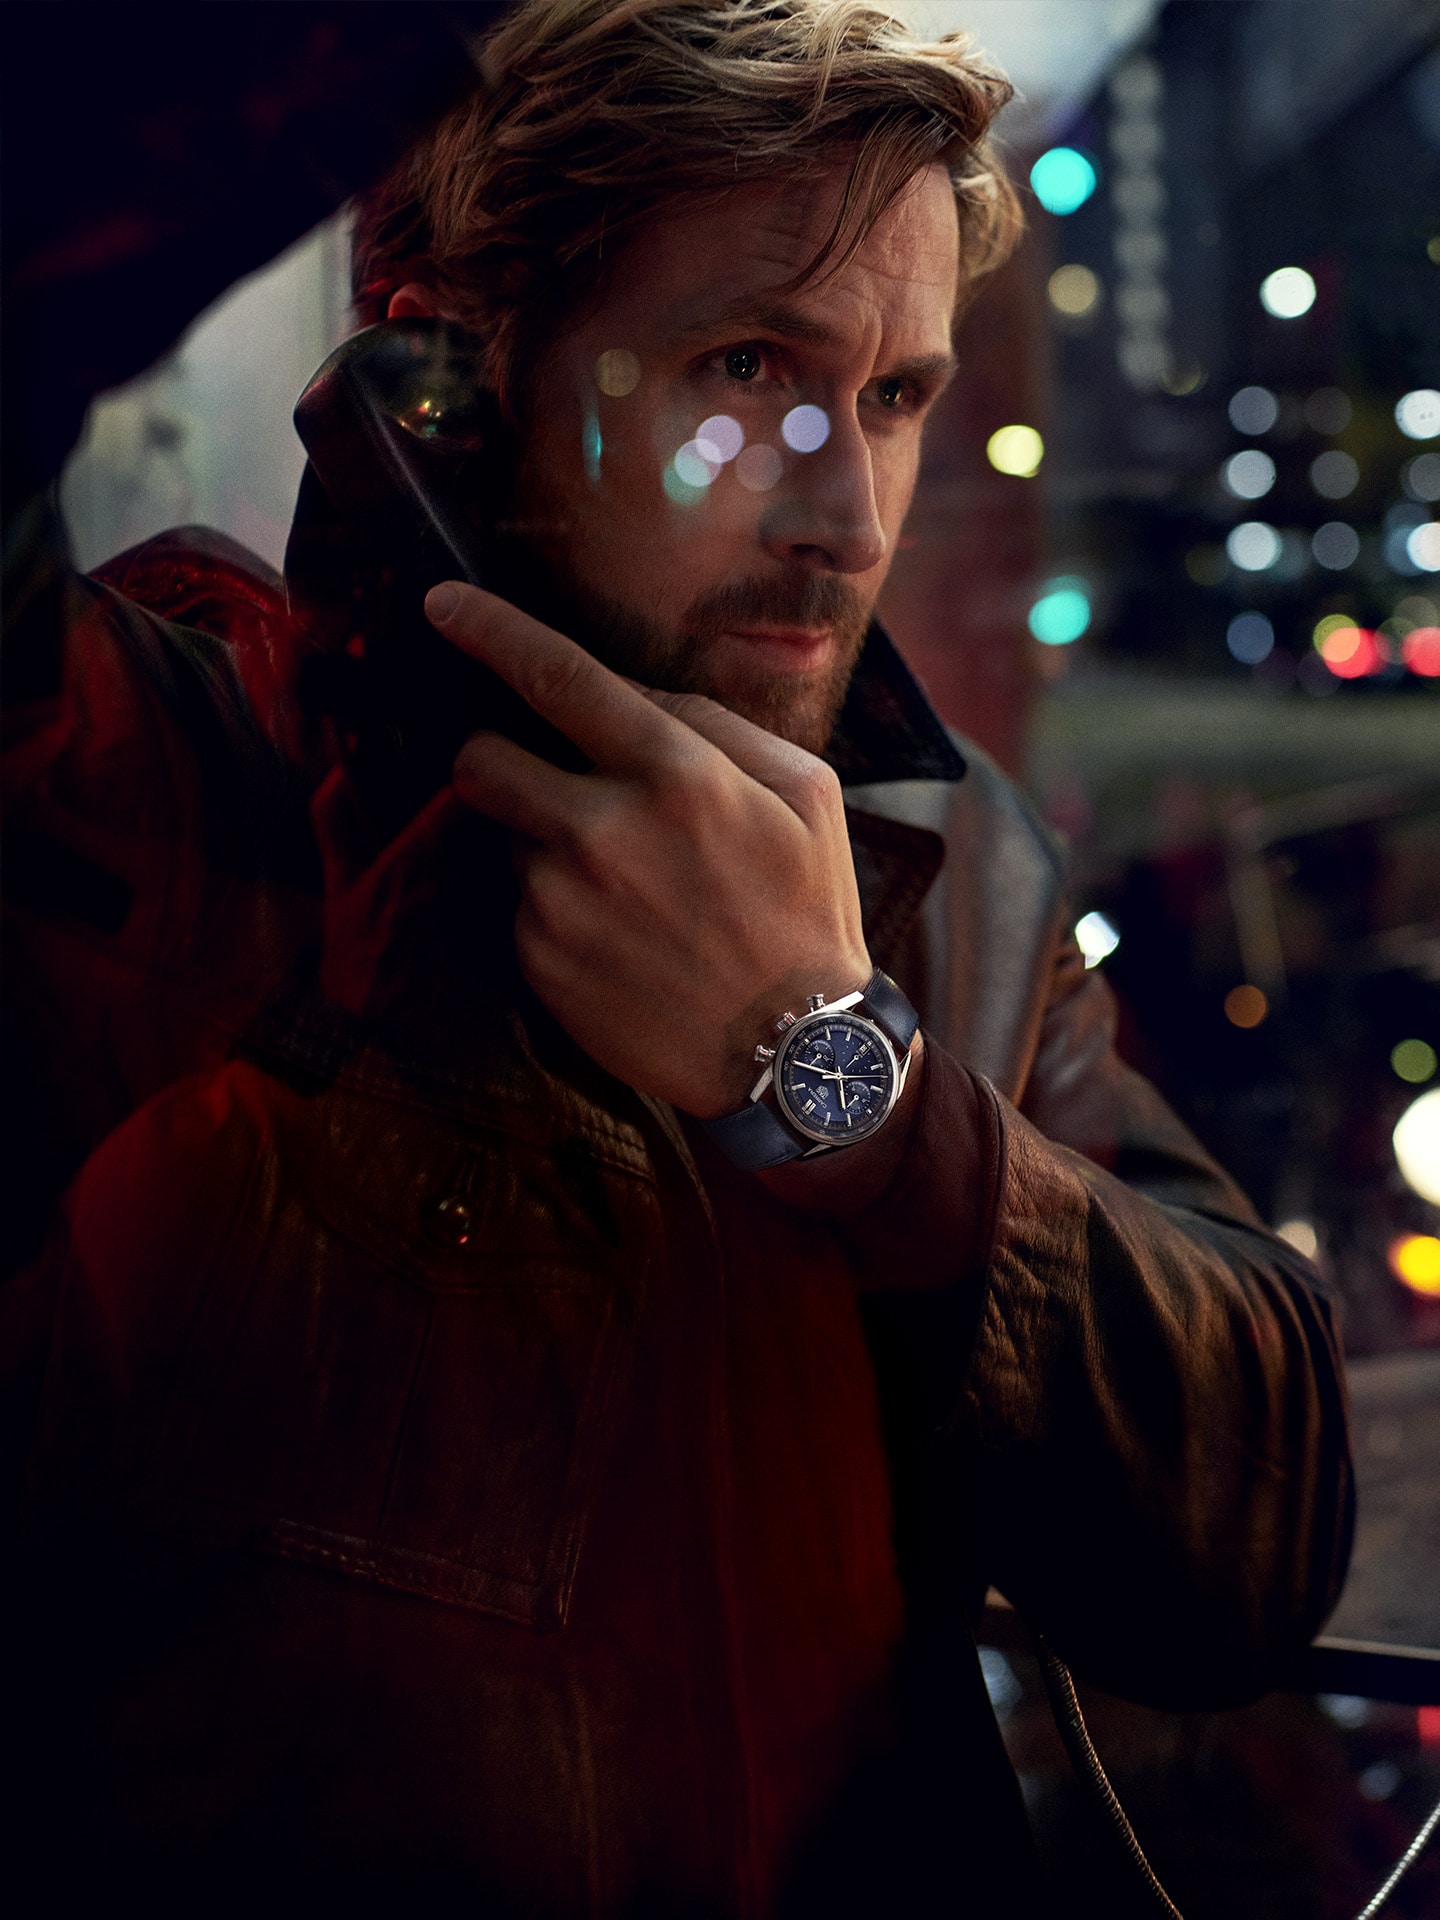 Ryan Gosling The Chase for Carrera Leather Jacket